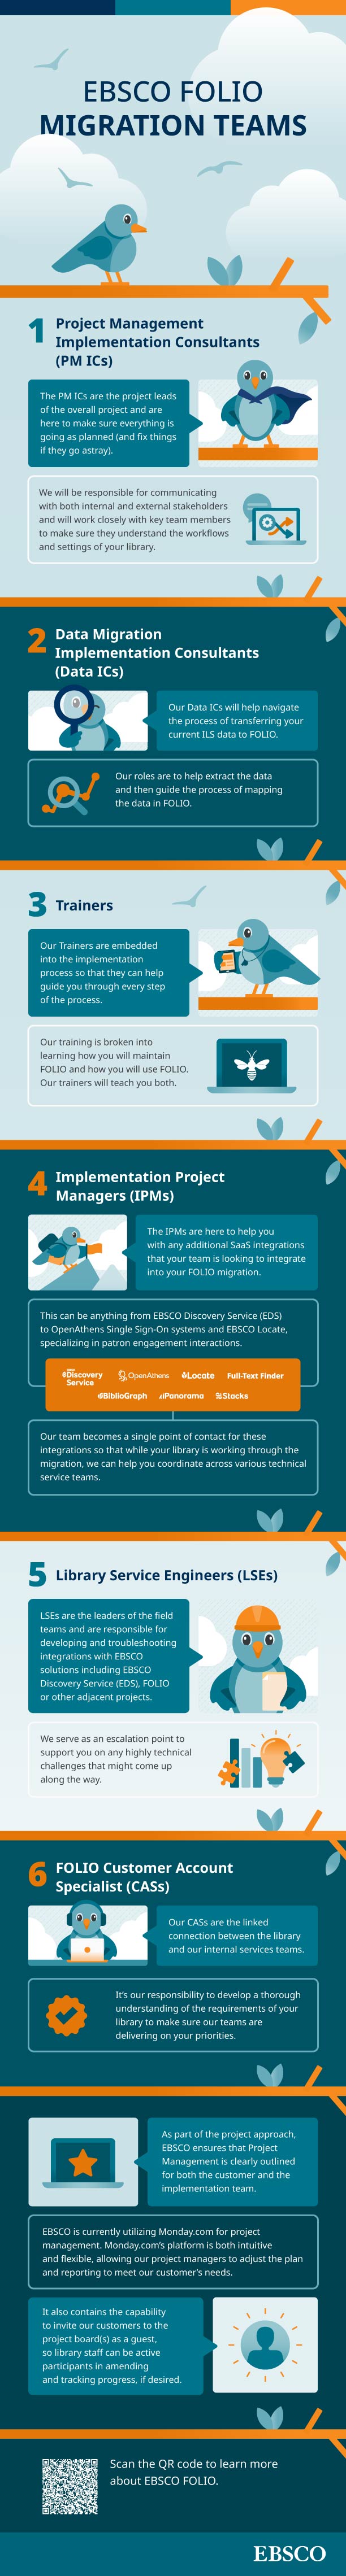 An infographic outlining the roles of teams involved in the migration to EBSCO FOLIO library services platform